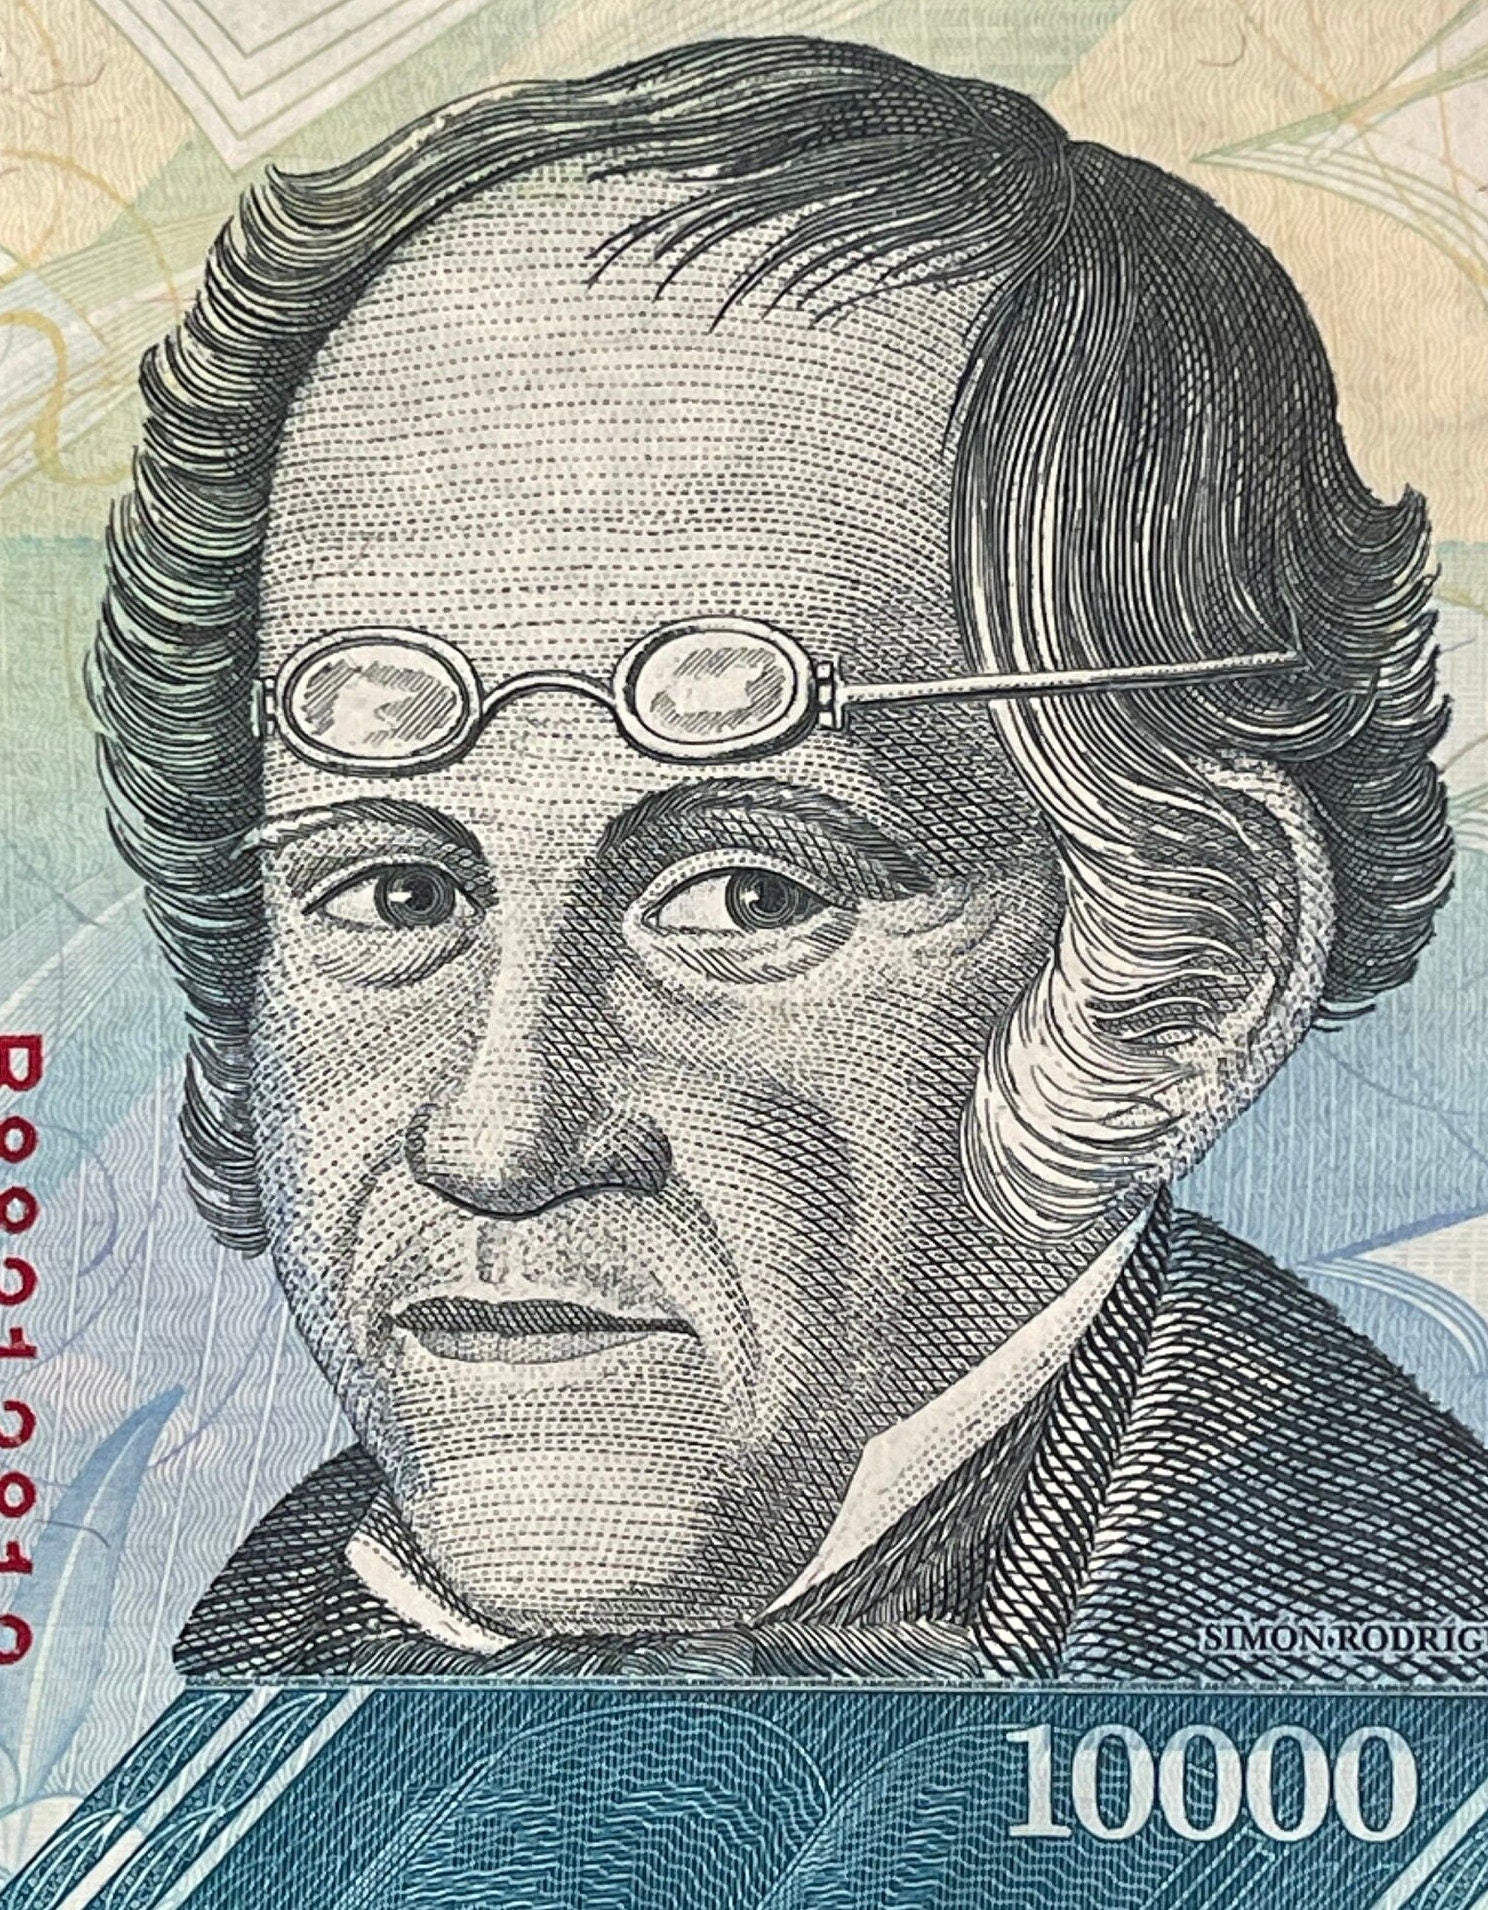 Andean Spectacled Bear & Philosopher Simón Rodríguez 10,000 Bolívares Venezuela Authentic Banknote Money for Jewelry and Collage (Educator)